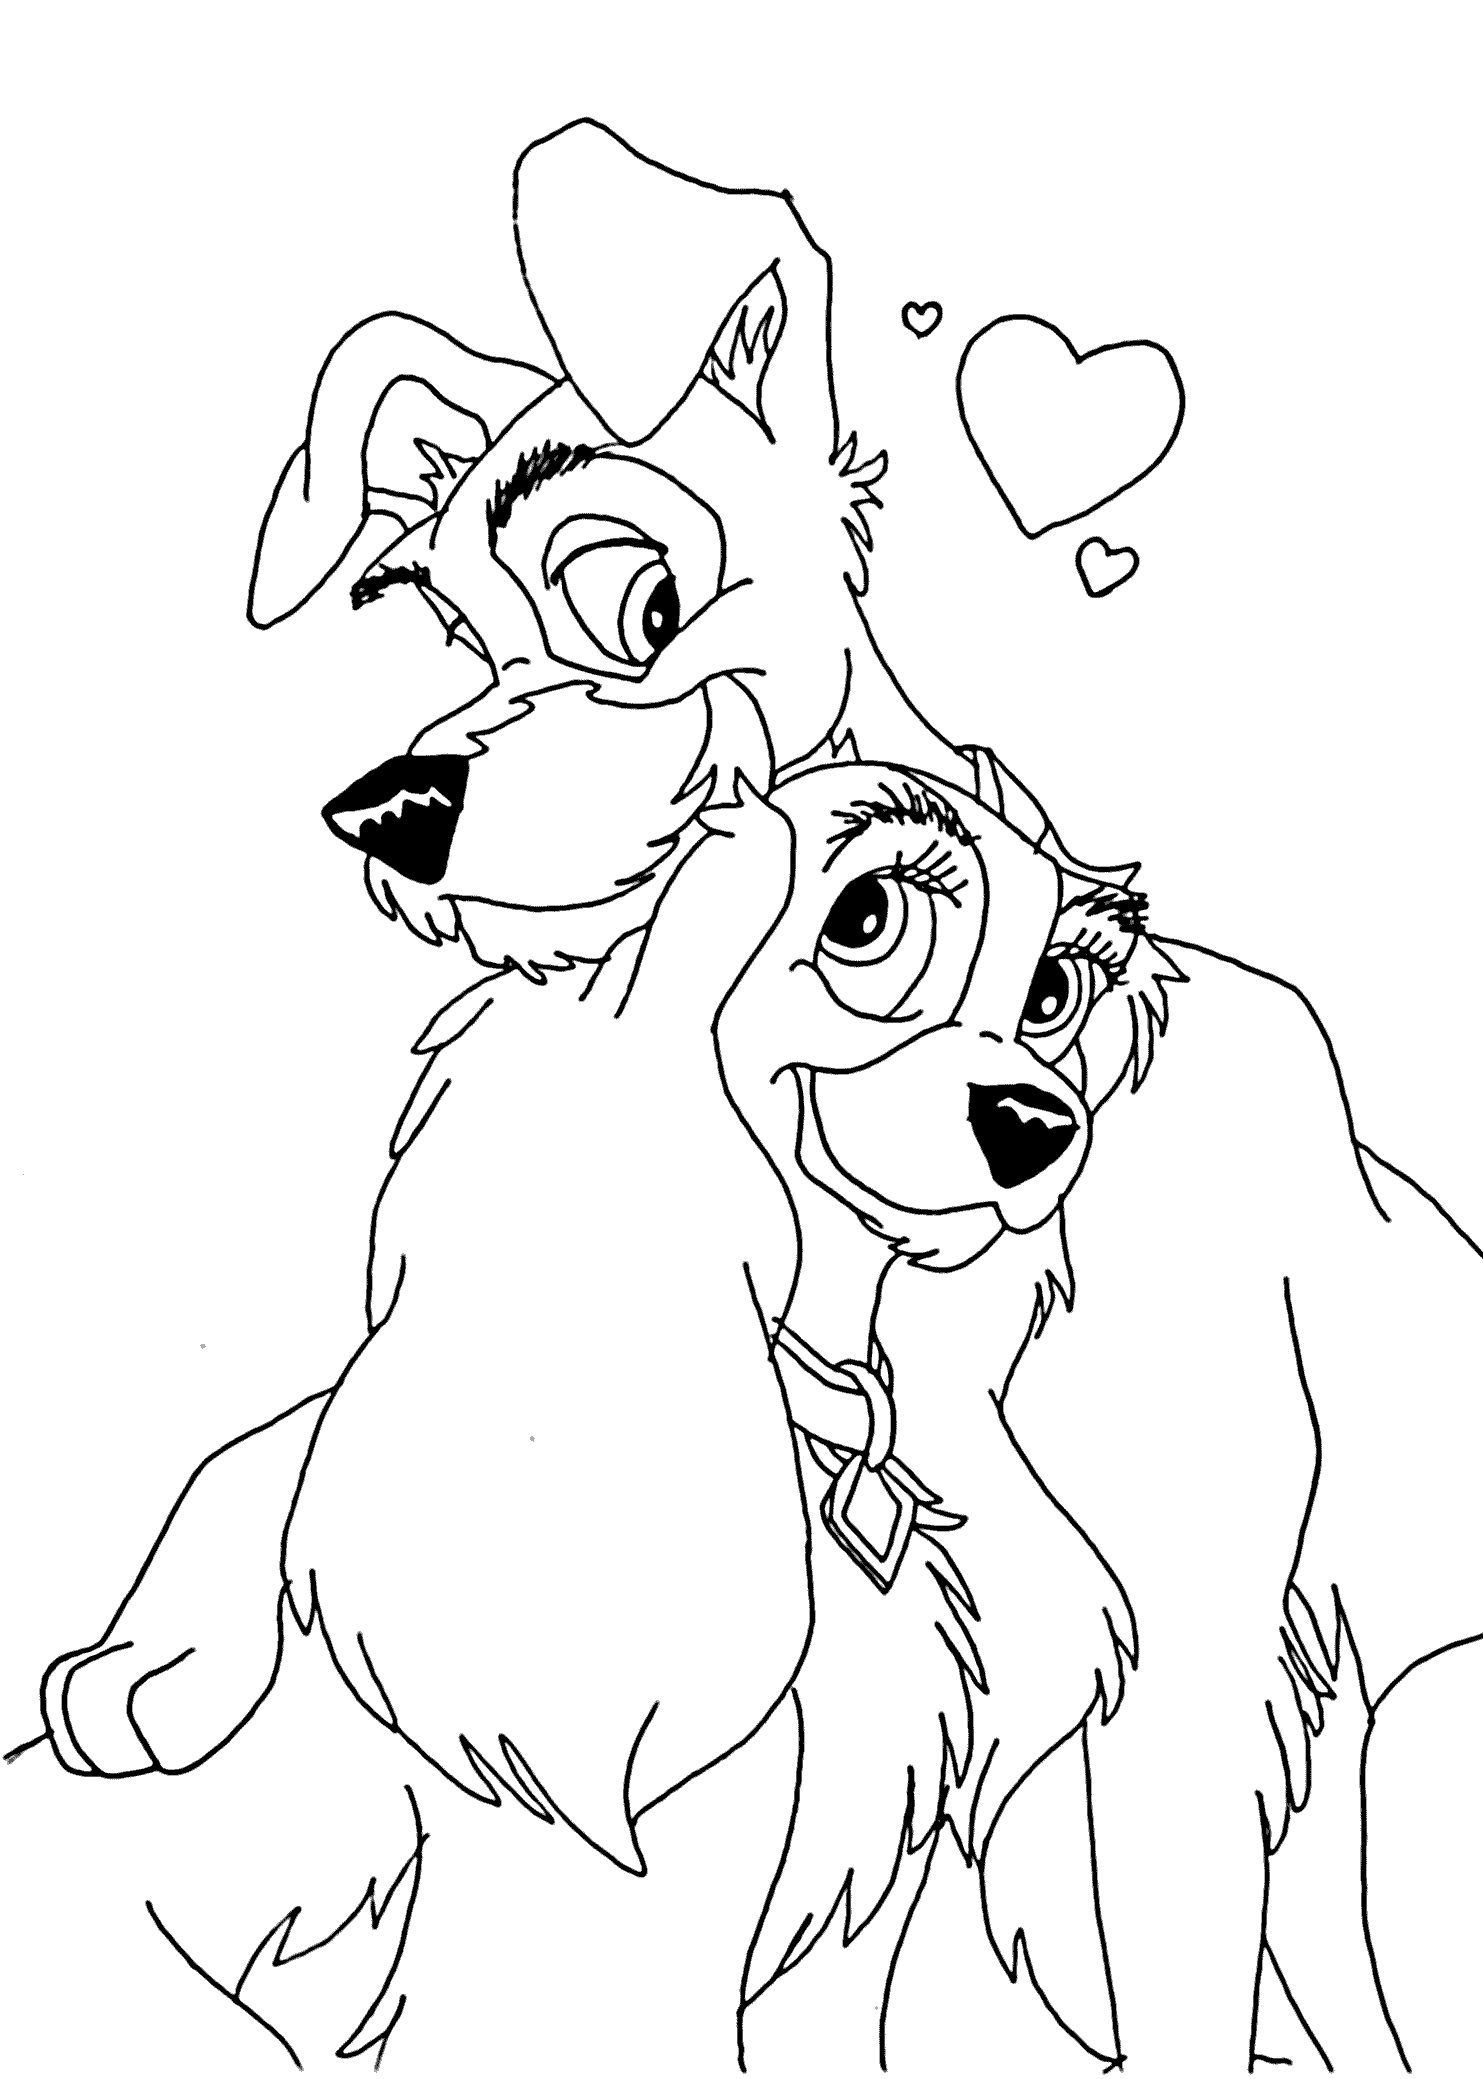 Lady and the Tramp Coloring Pages - Best Coloring Pages For Kids